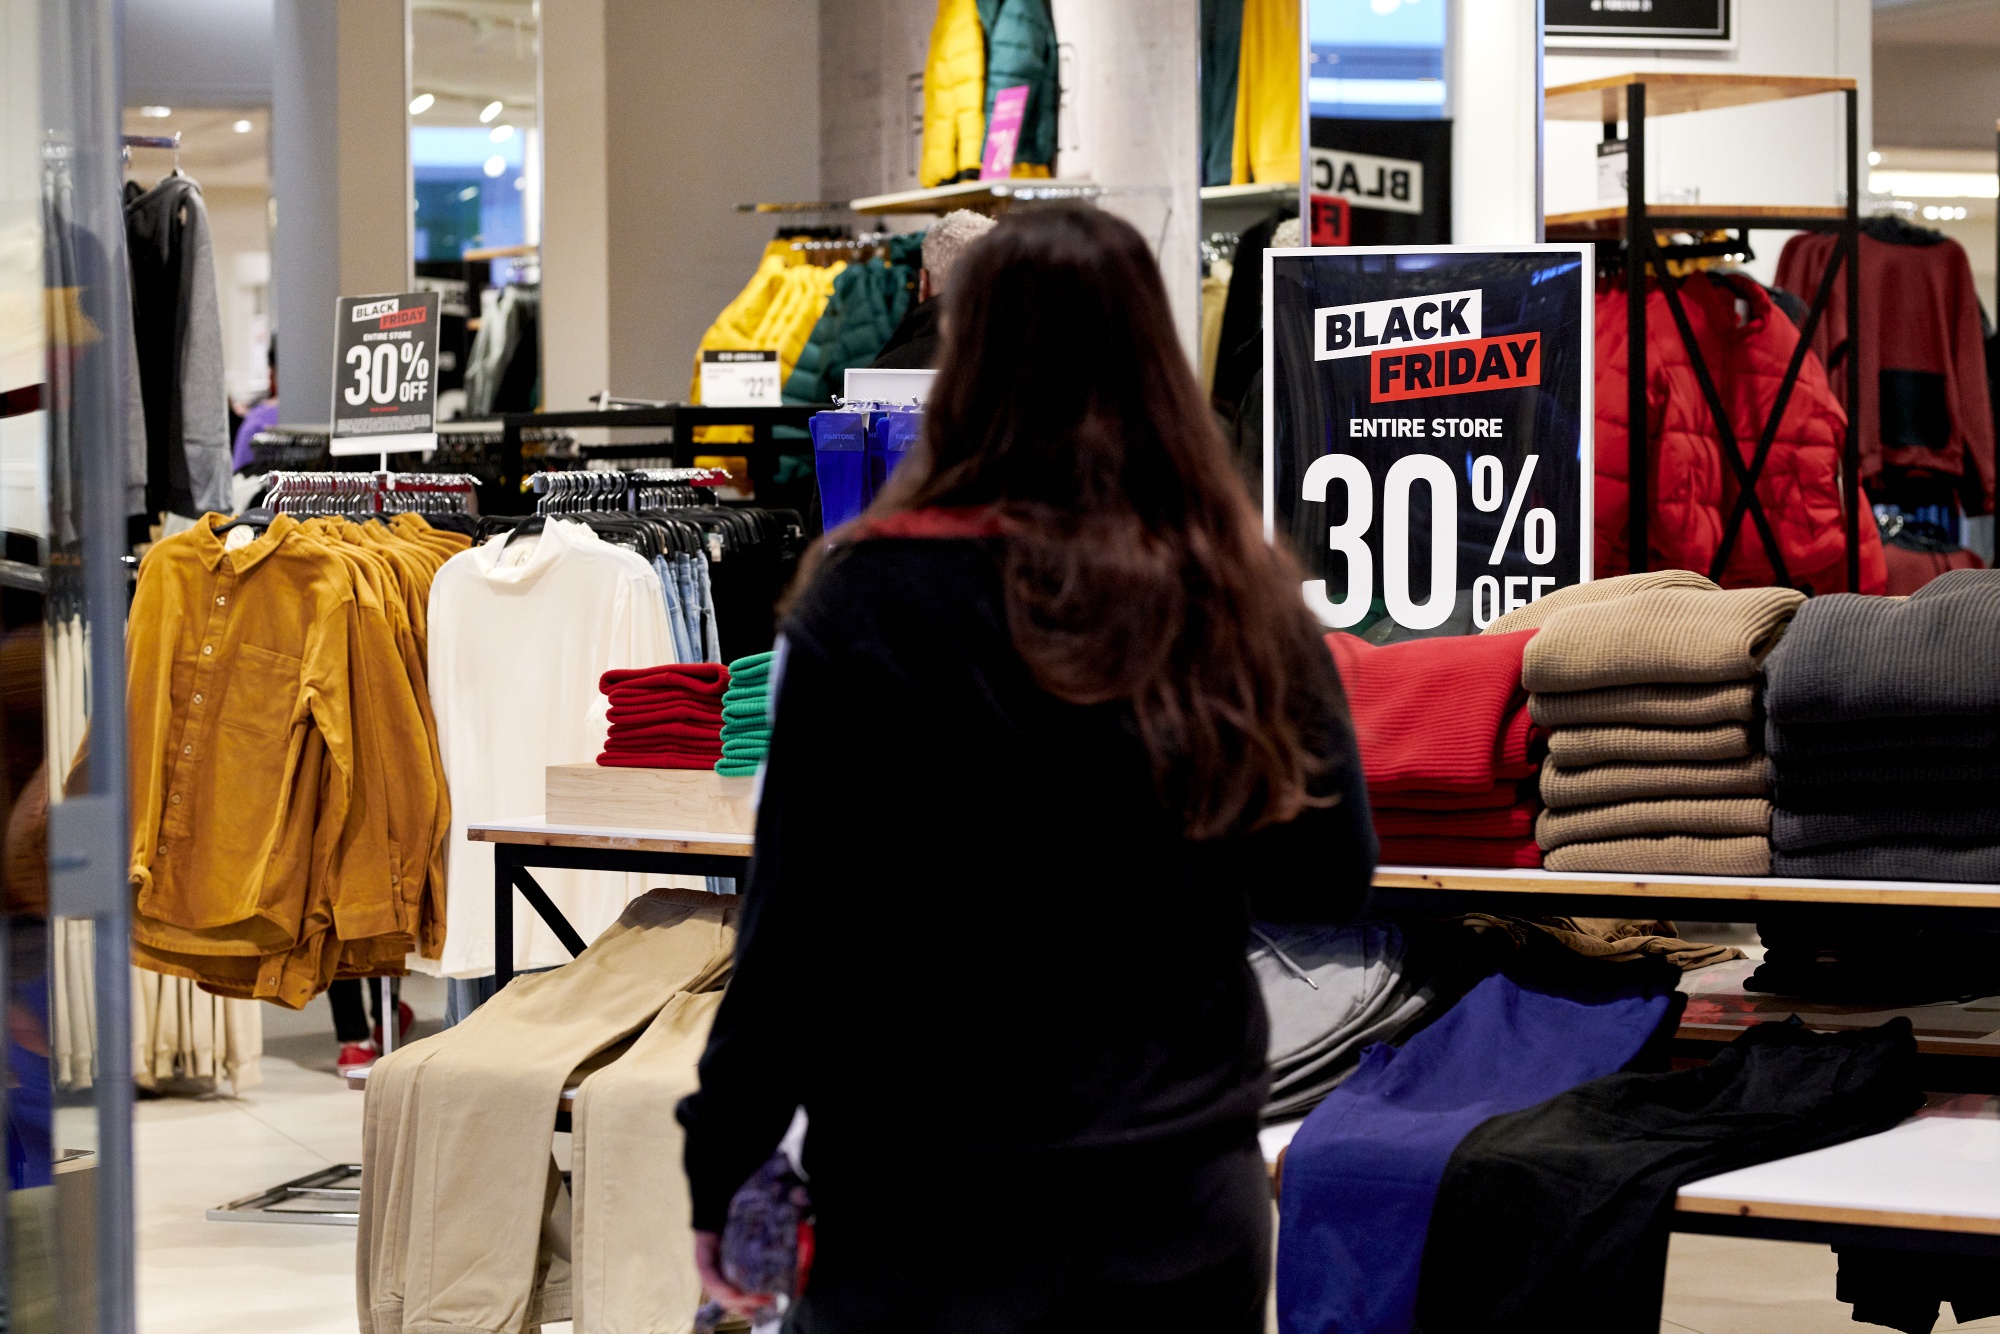 Black Friday Is Struggling to Tempt Today’s Consumers - Bloomberg